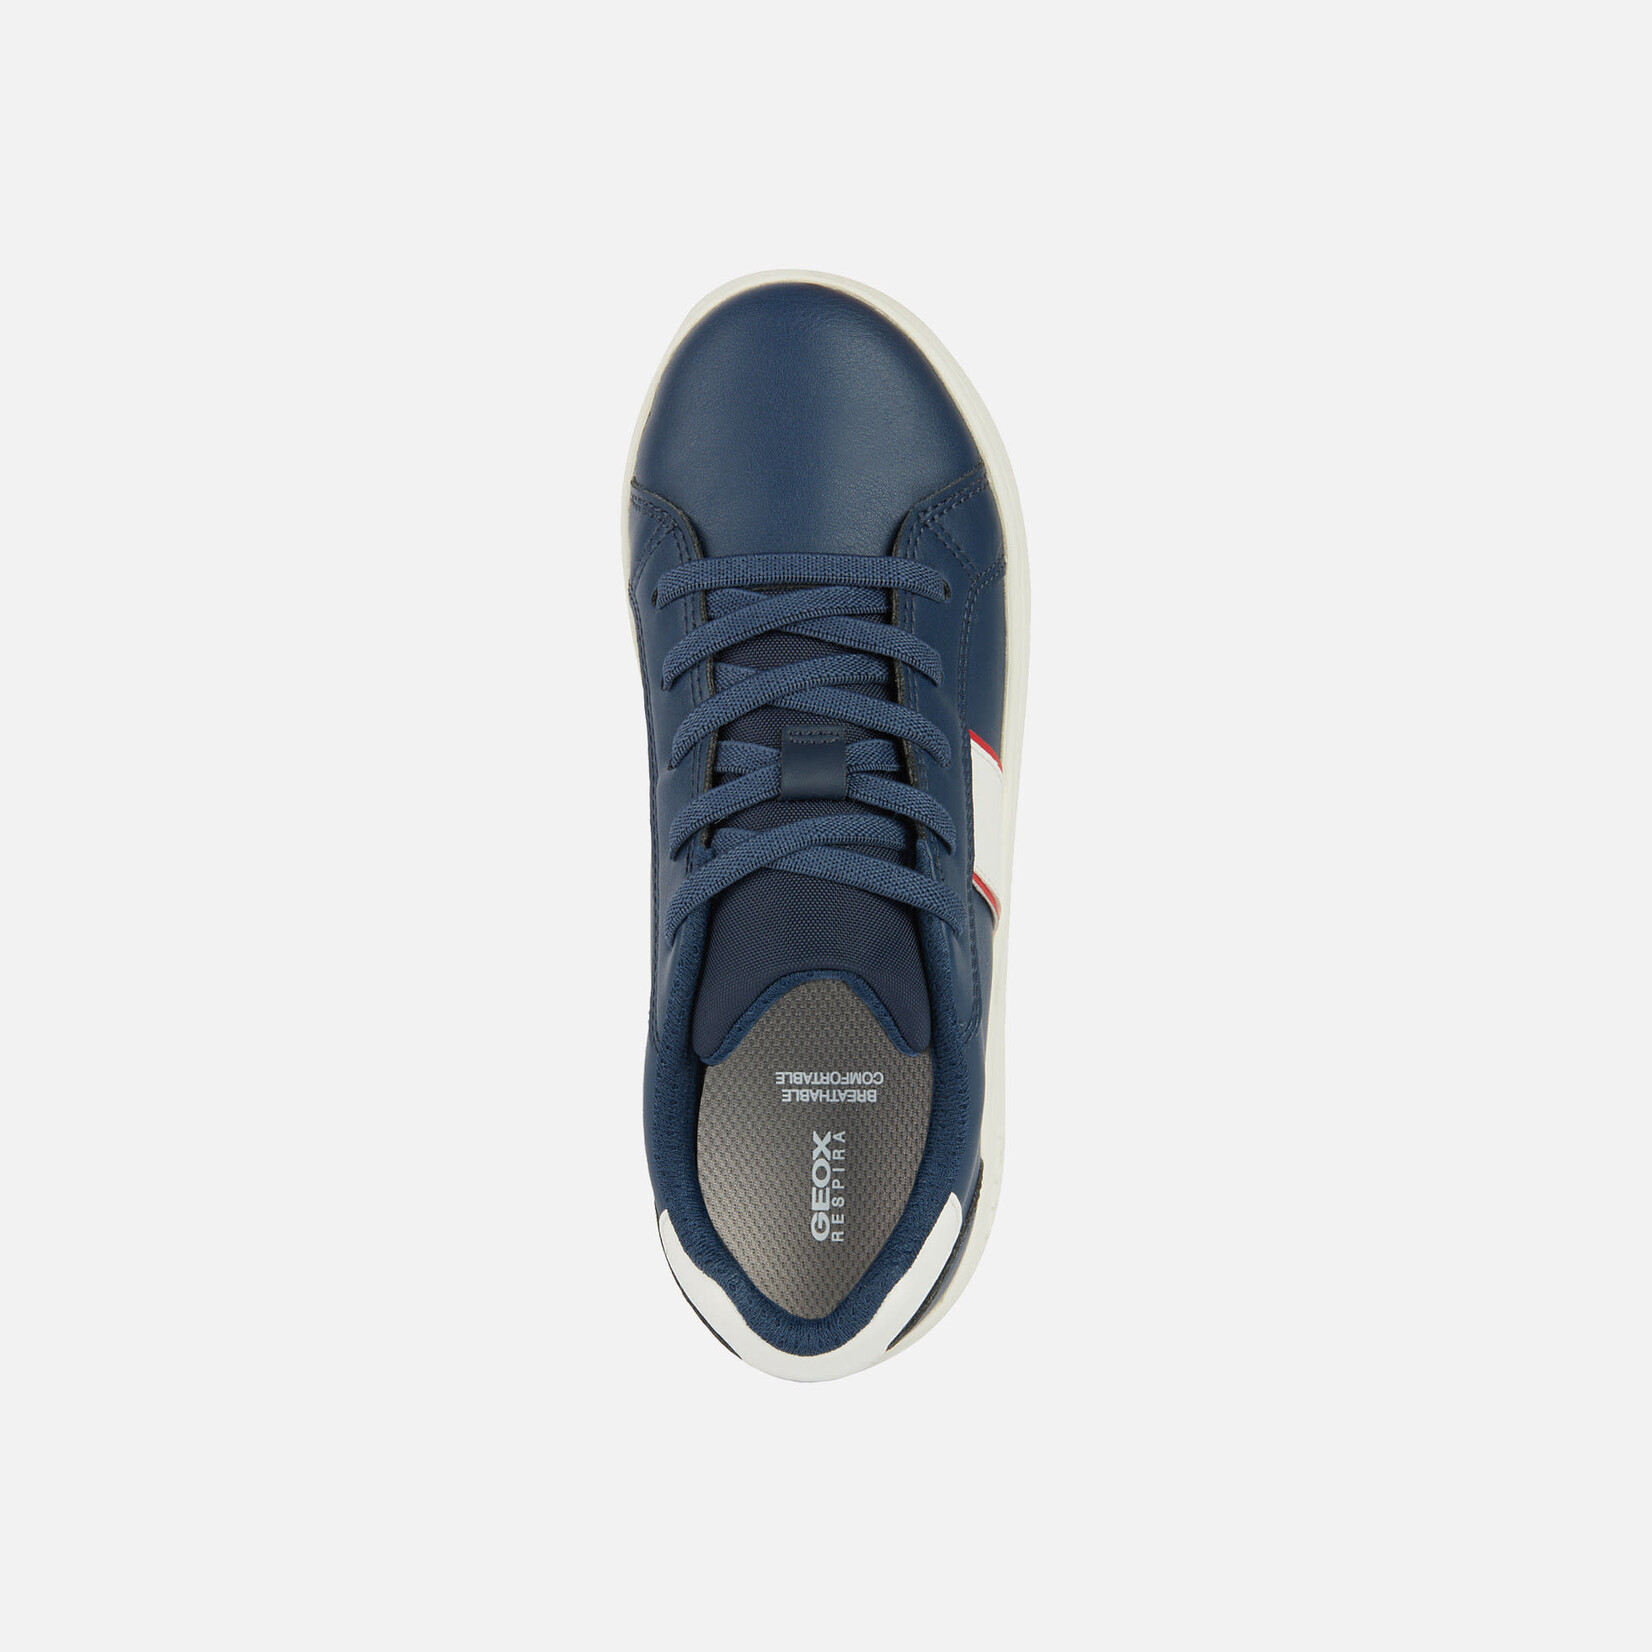 Geox GEOX - White synthetic leather sneakers 'Eclyper - Avio Navy/White'